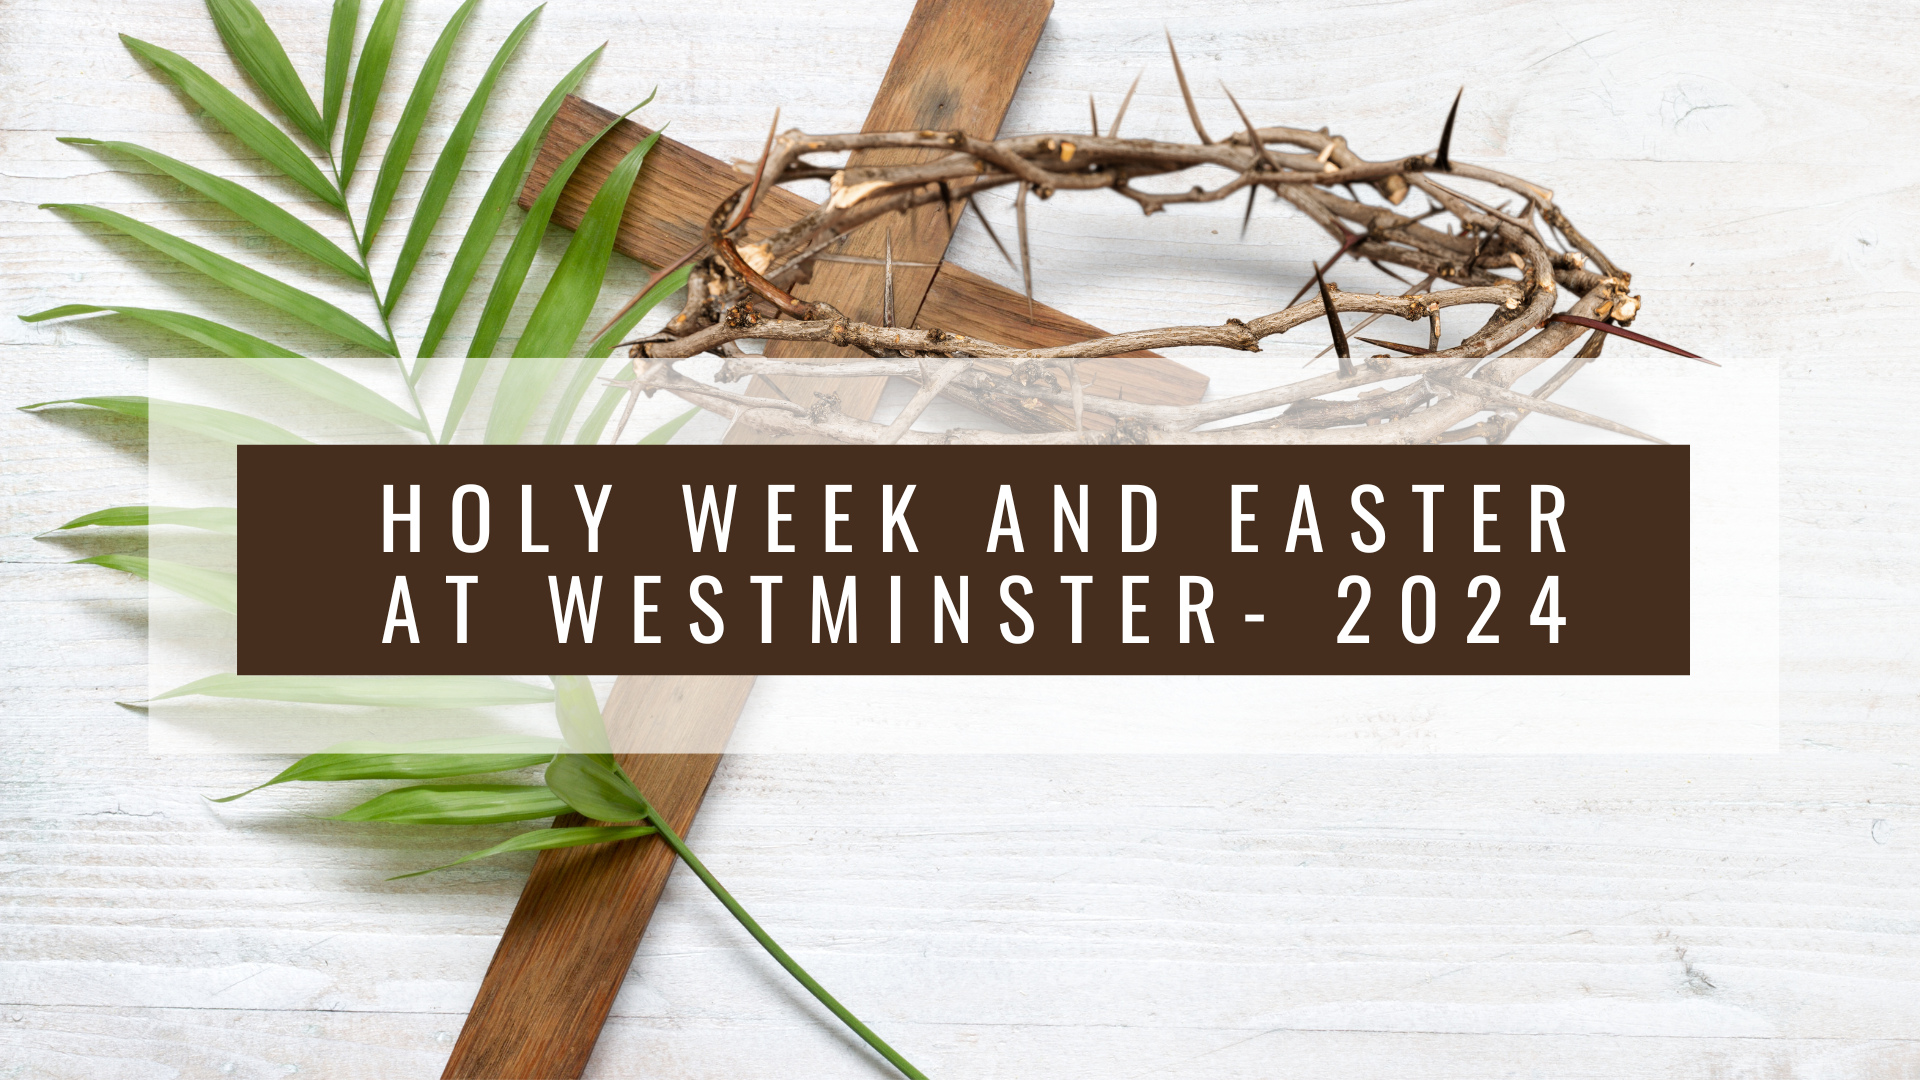 Holy Week and Easter at Westminster – 2024